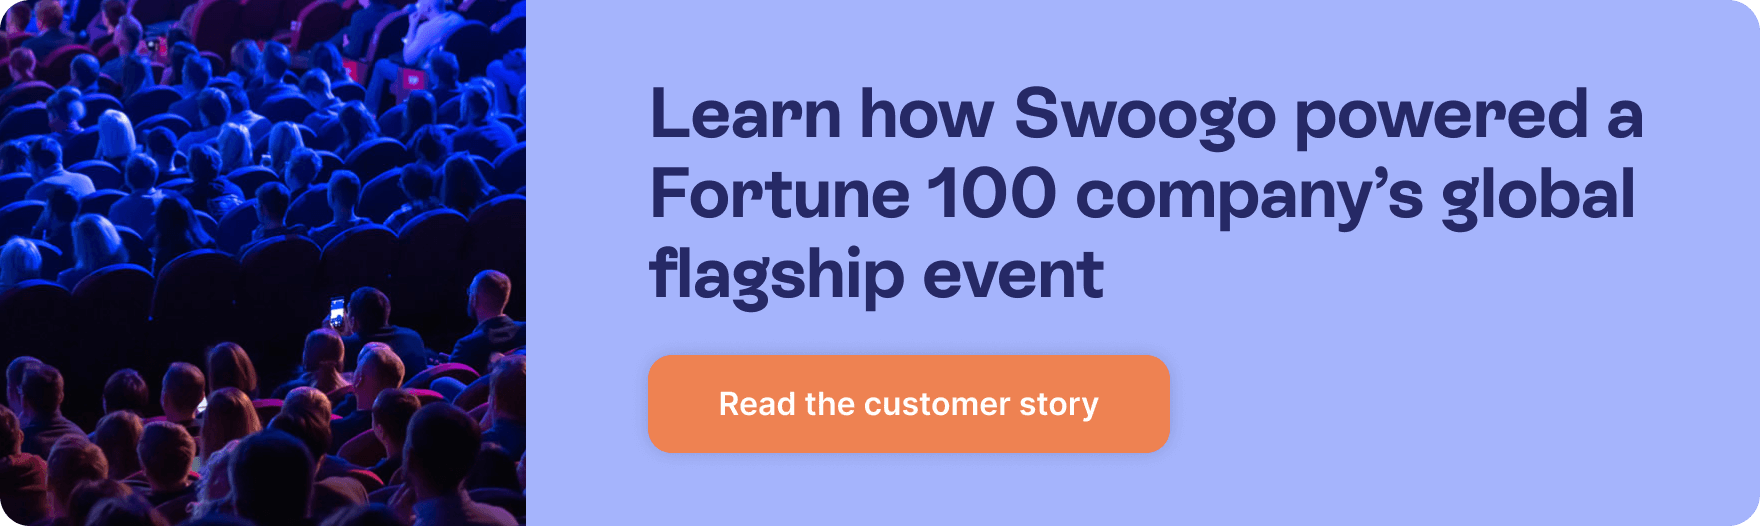 Learn how Swoogo powered a Fortune 100 company’s global flagship event